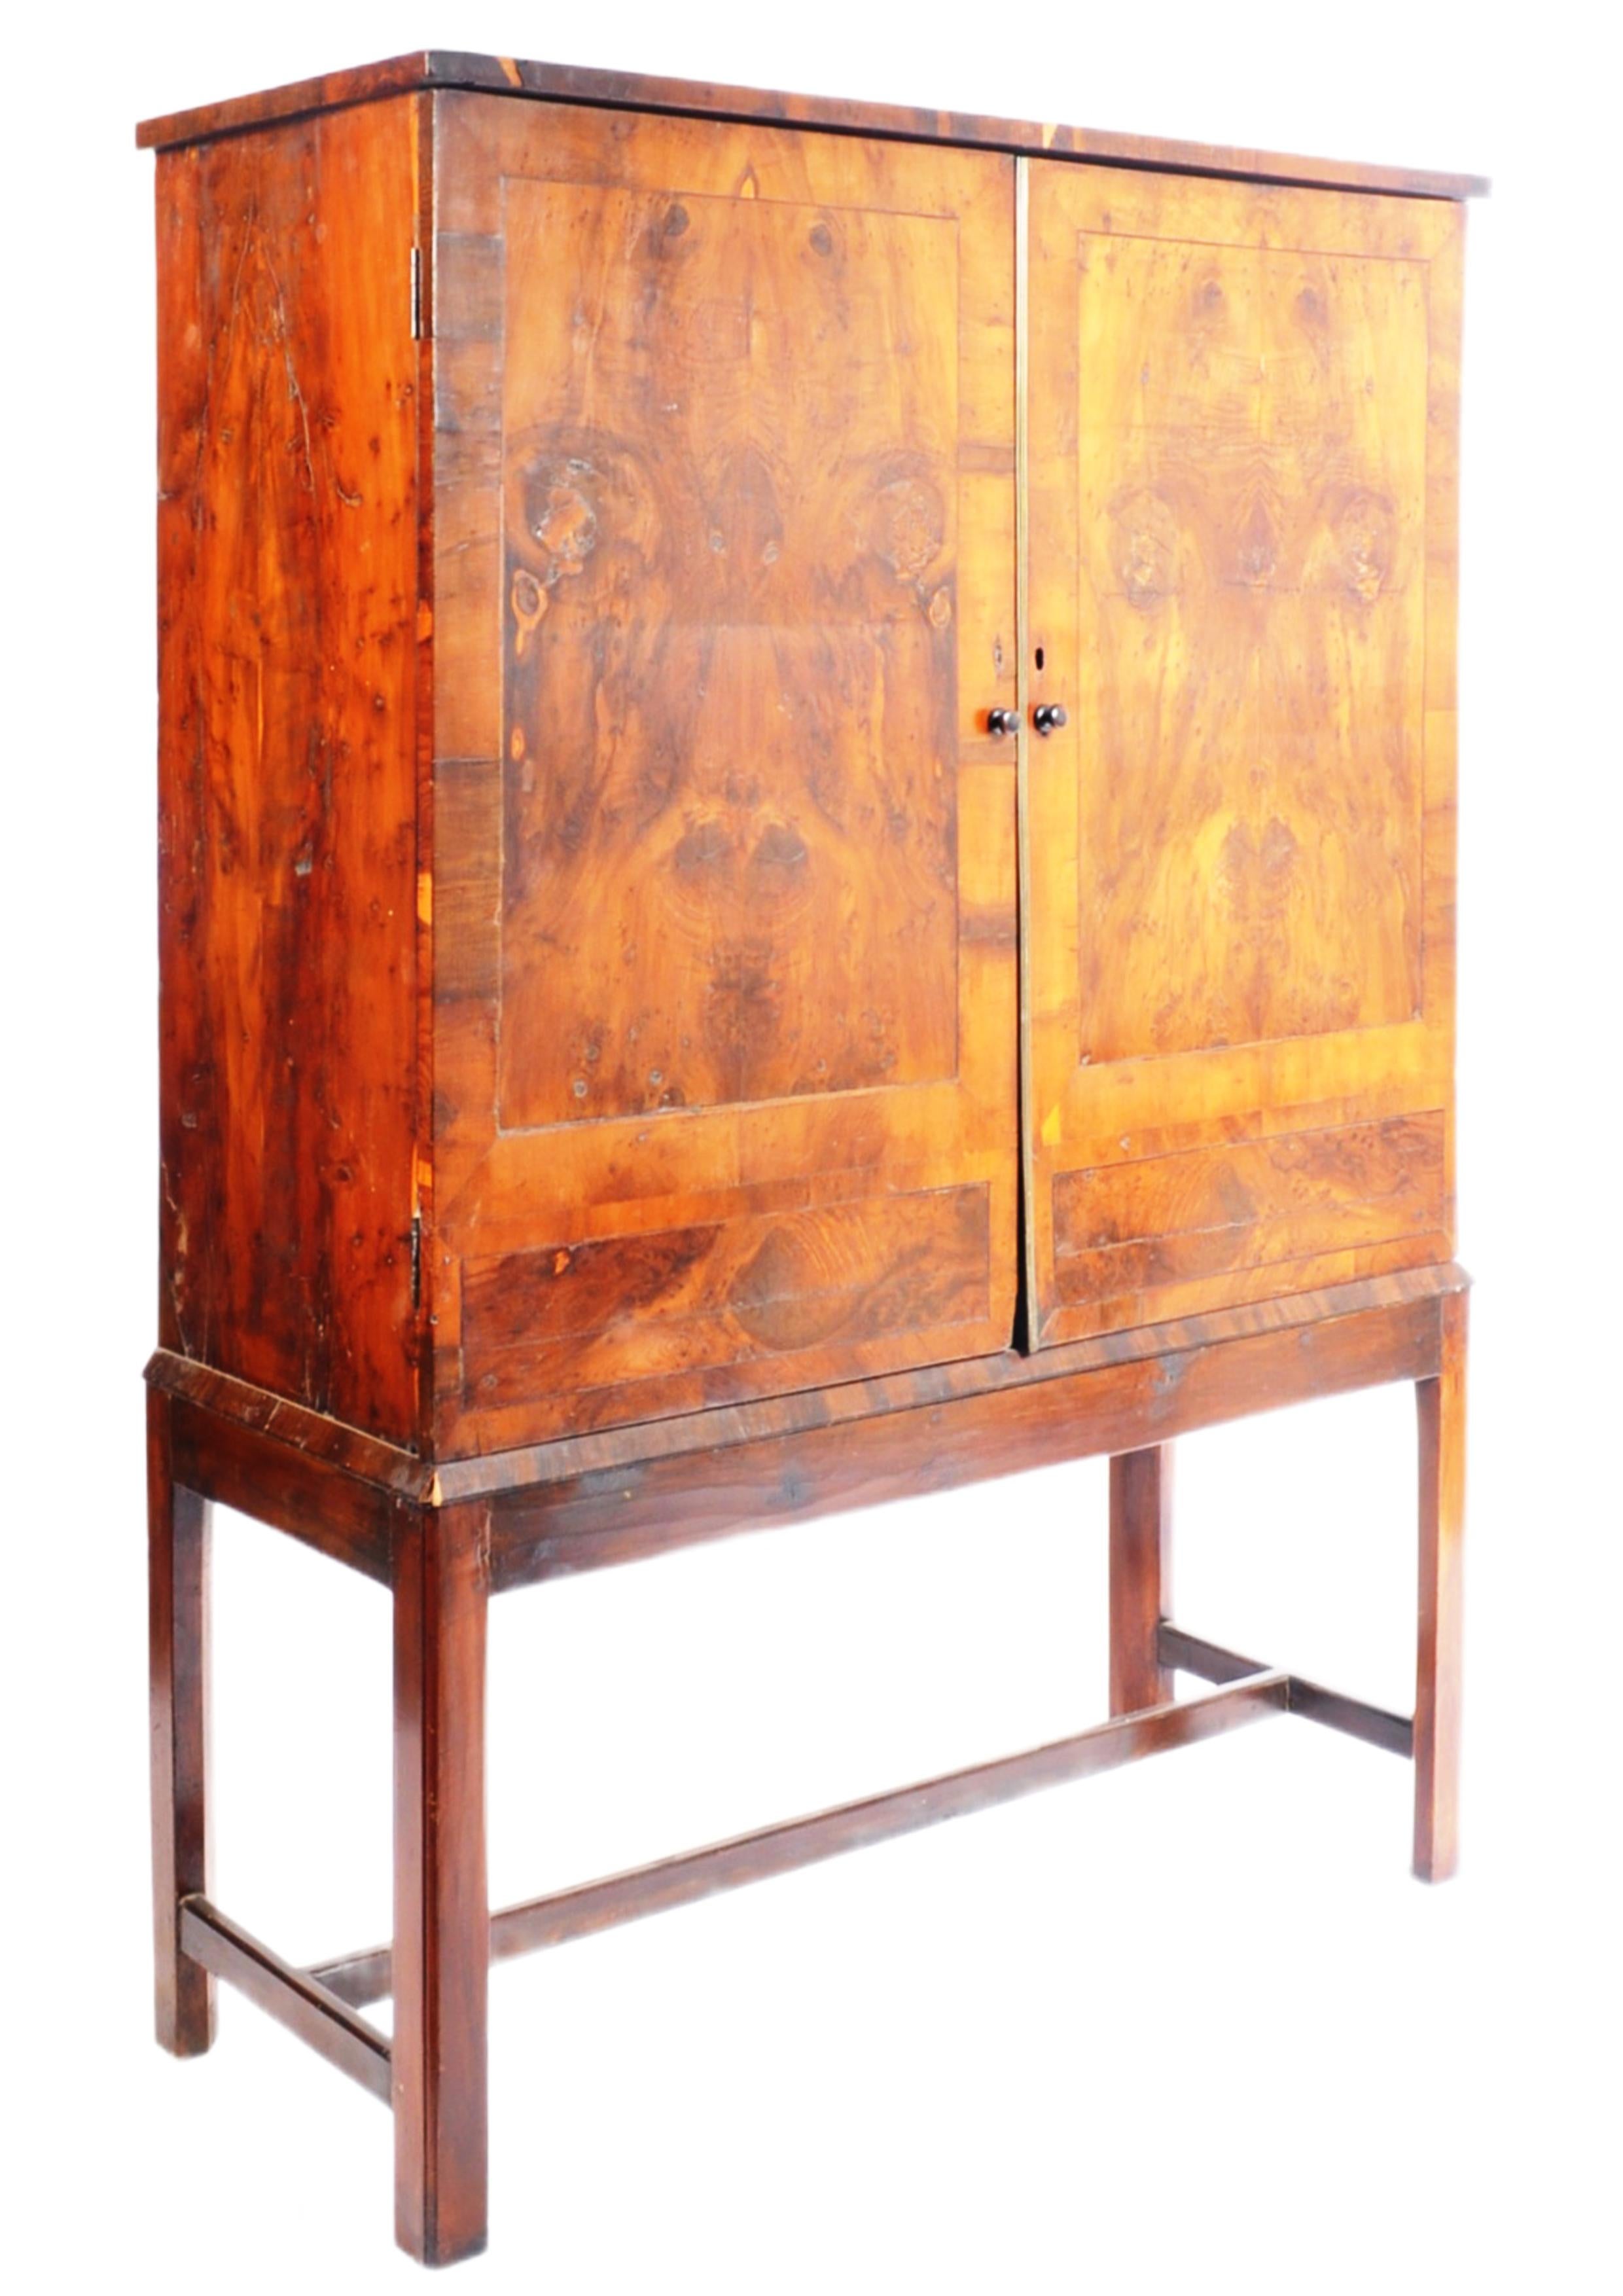 Rare 18th Century Library Yew Wood Specimen Collectors Cabinet Chest on Stand For Sale 1